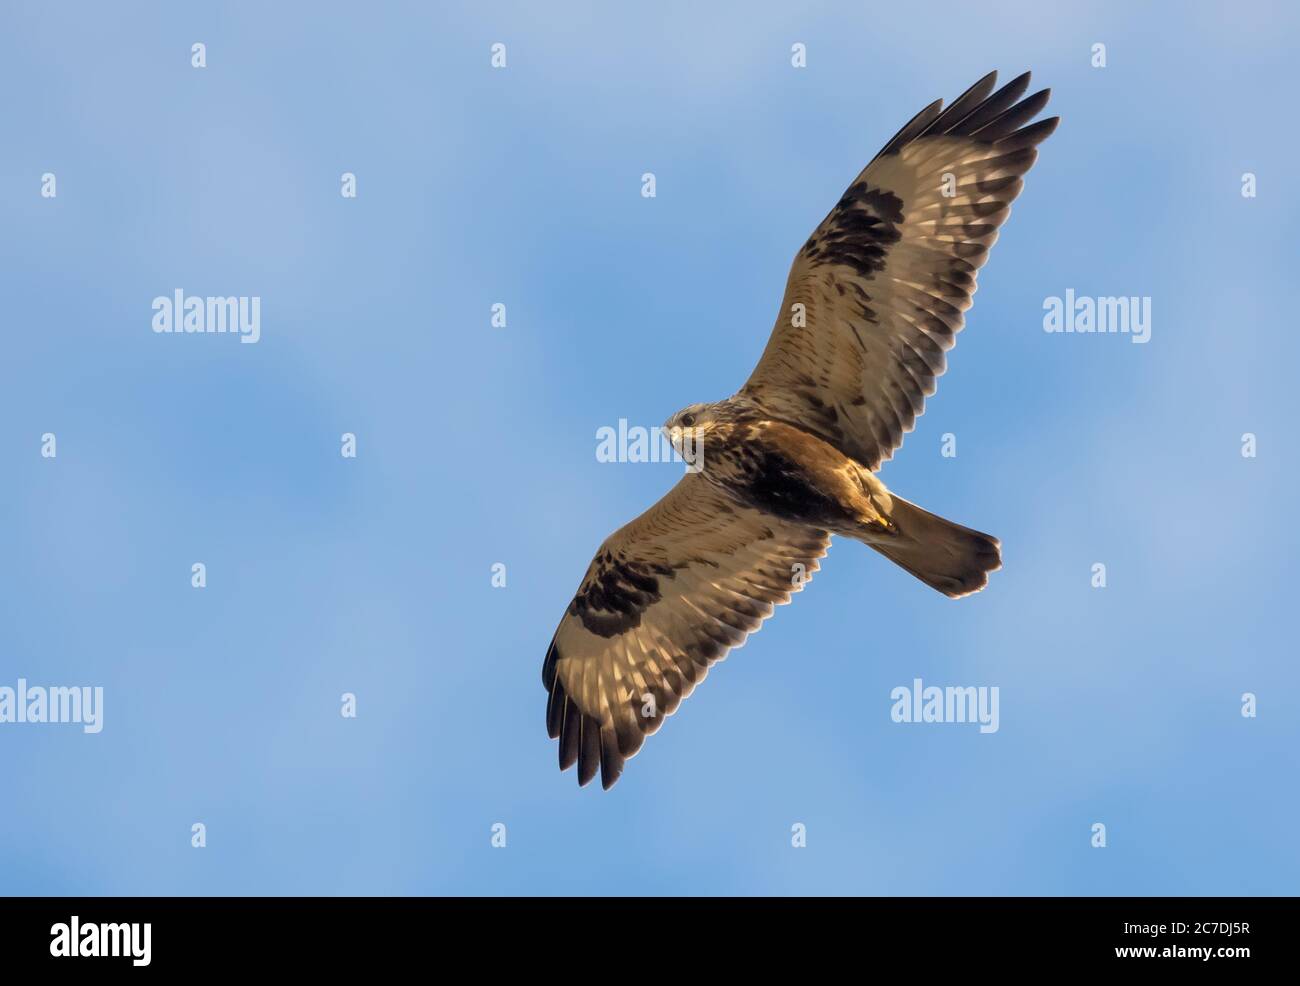 Rough-legged buzzard (Buteo lagopus) flies high in blue sky with spreaded wings Stock Photo